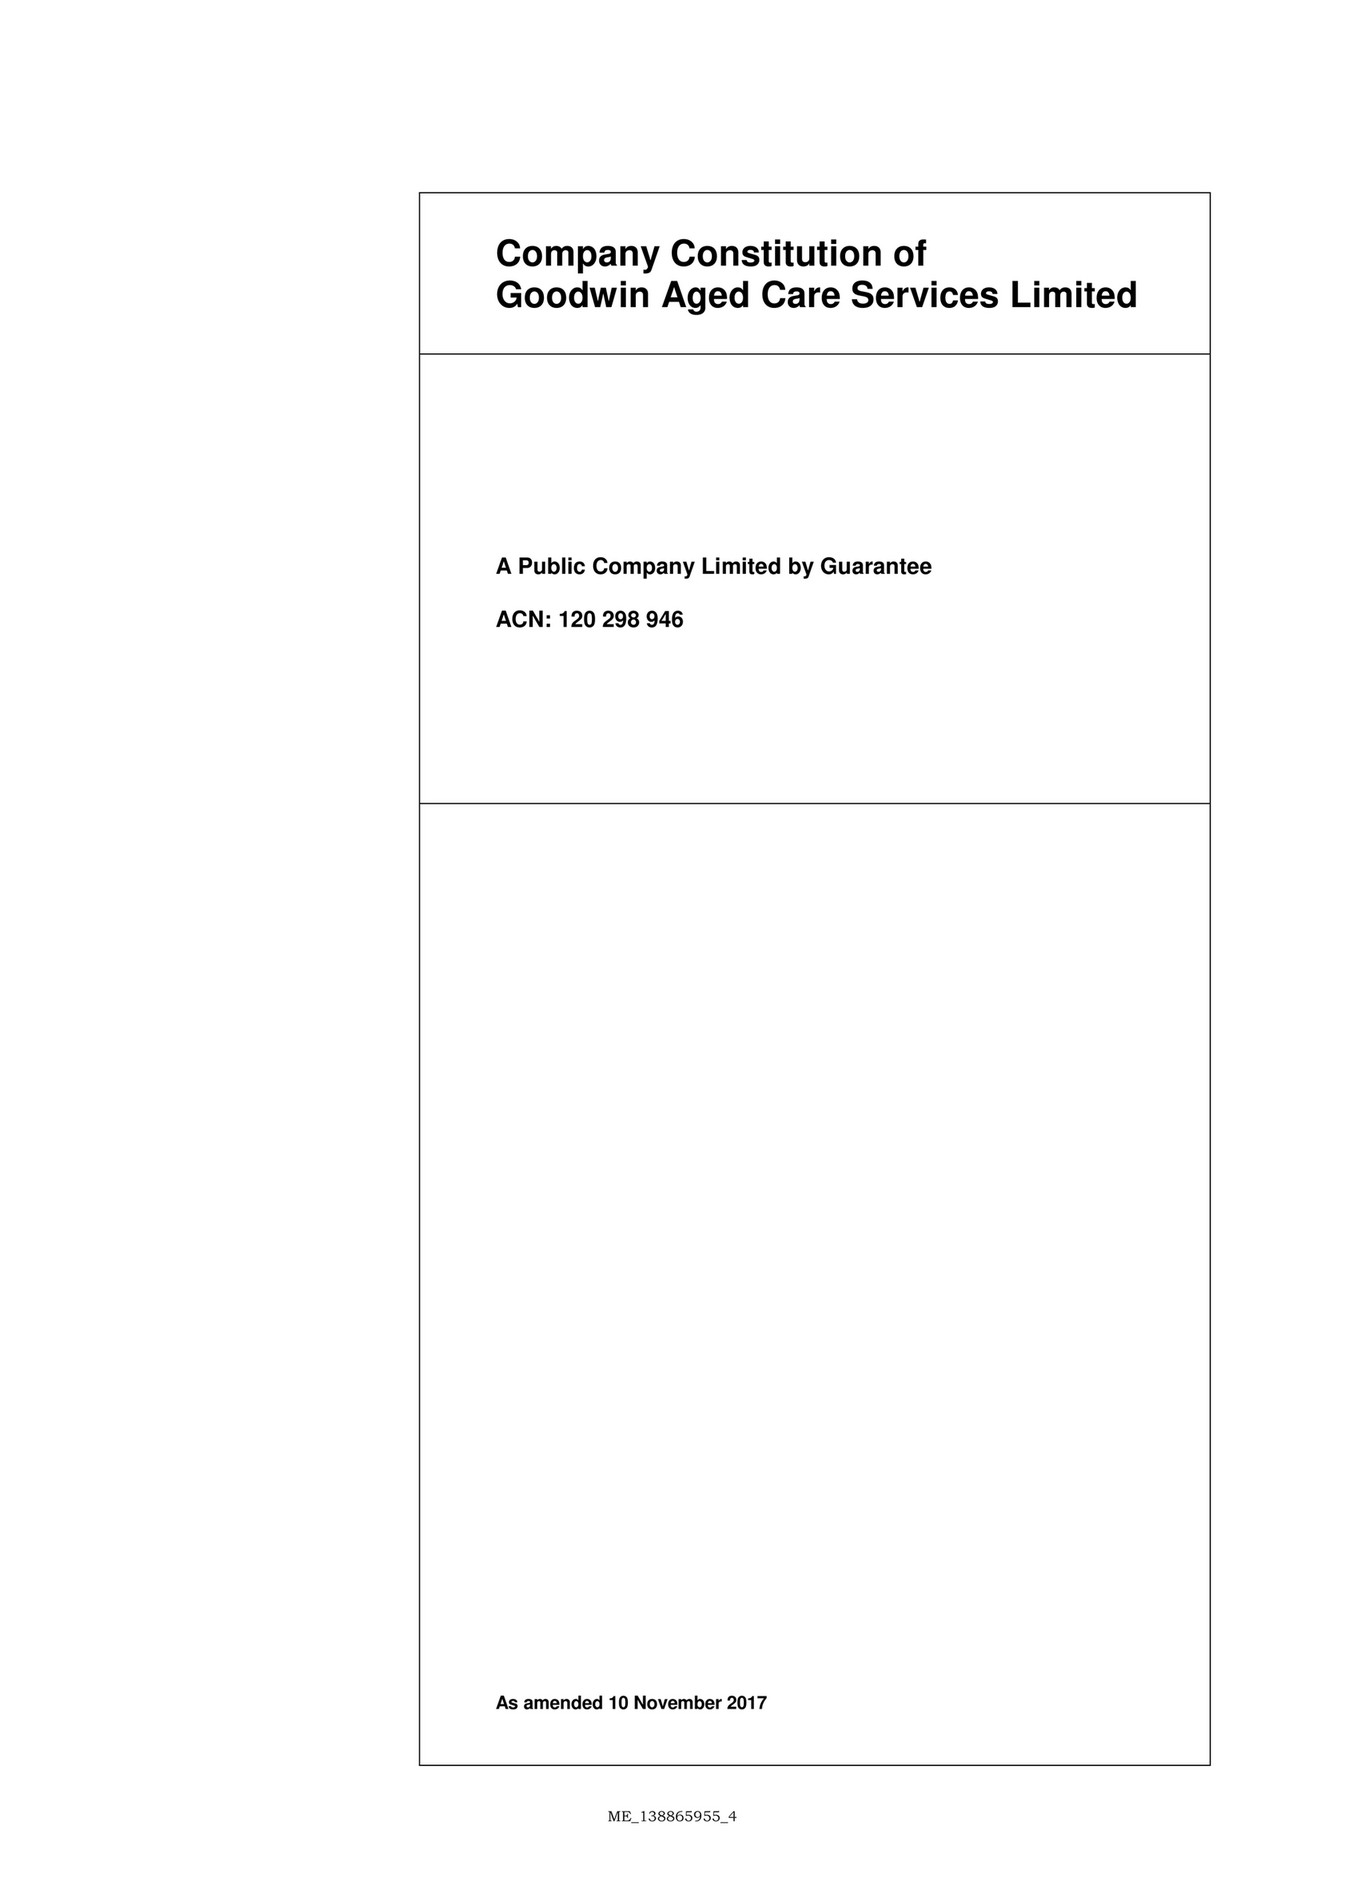 Goodwin - Goodwin-Aged-Care-Services-Limited-Constitution - Page 1